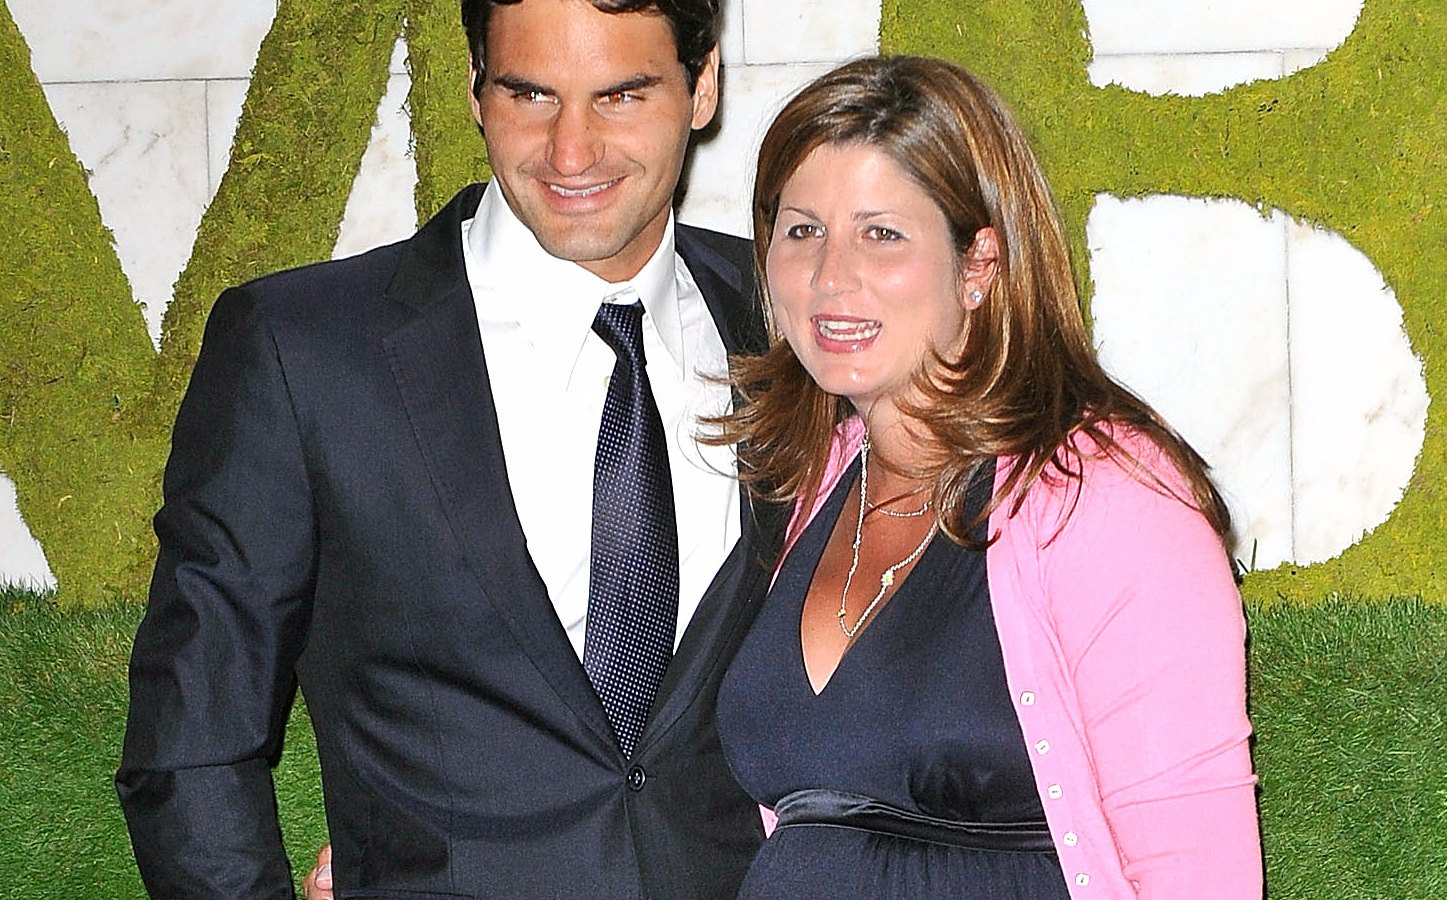 Rodger and Mirka Federer July 5, 2009 in London, England